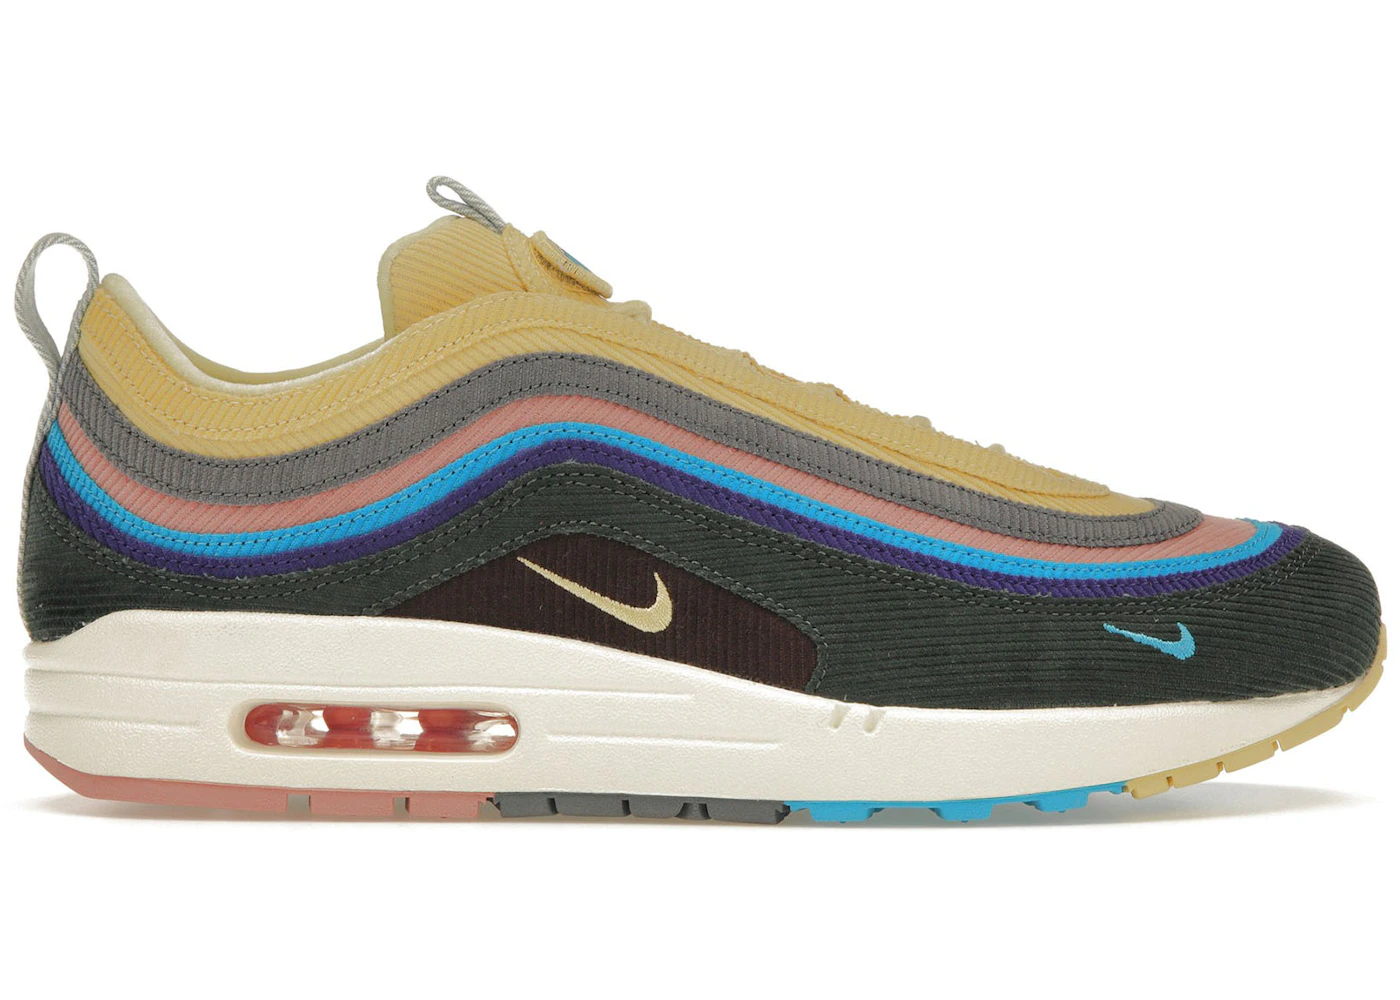 mereu Personificare Dulap pentru haine  Nike Air Max 1/97 Sean Wotherspoon (Extra Lace Set Only) - AJ4219-400 - US